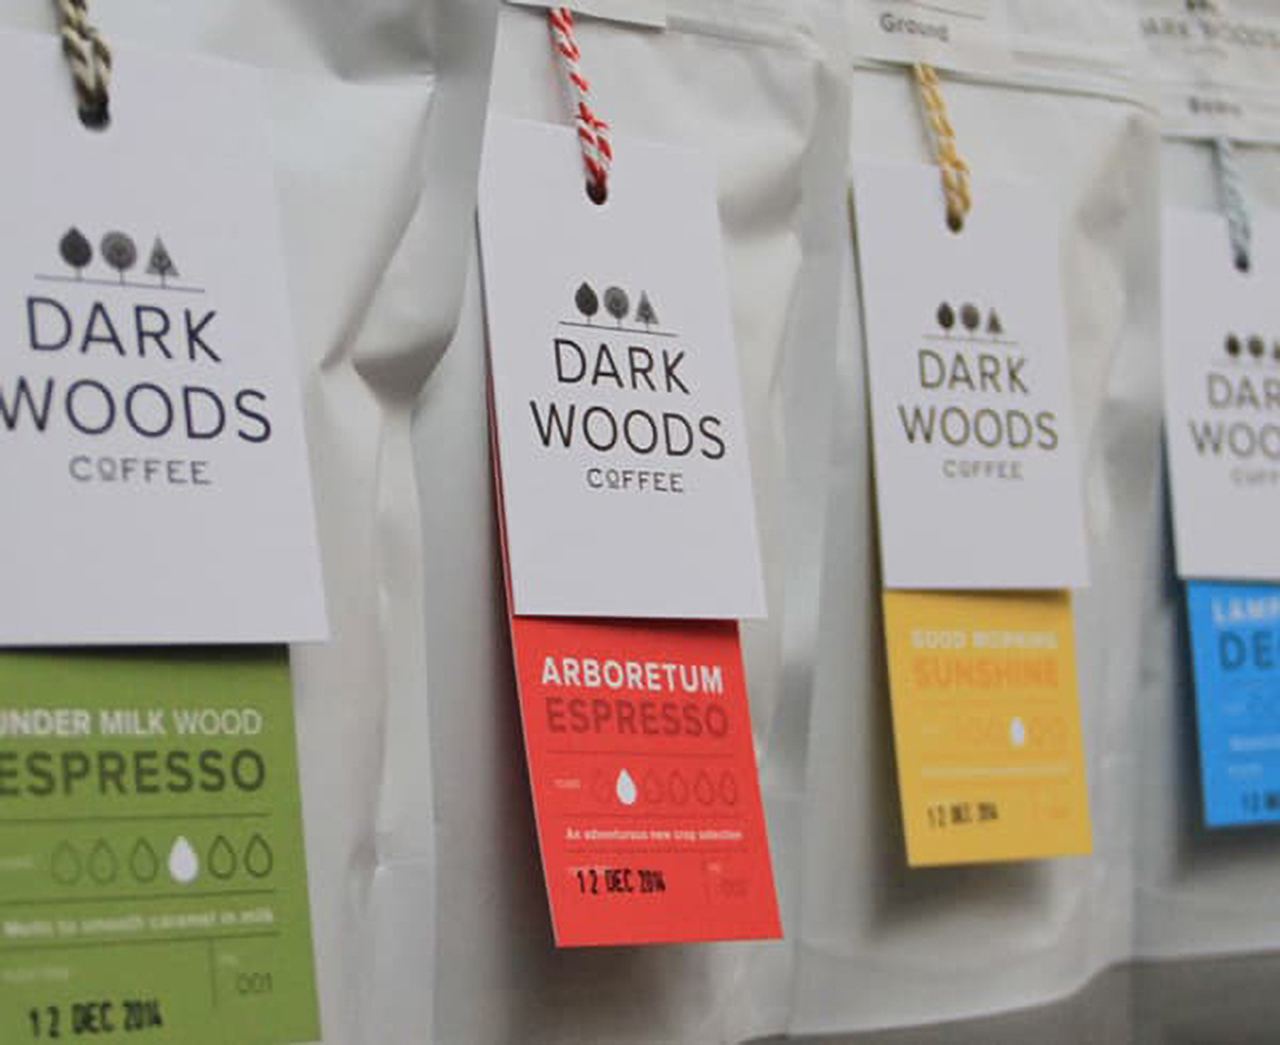 Different colored hang tag examples for the same brand hanged on simple white coffee bags.